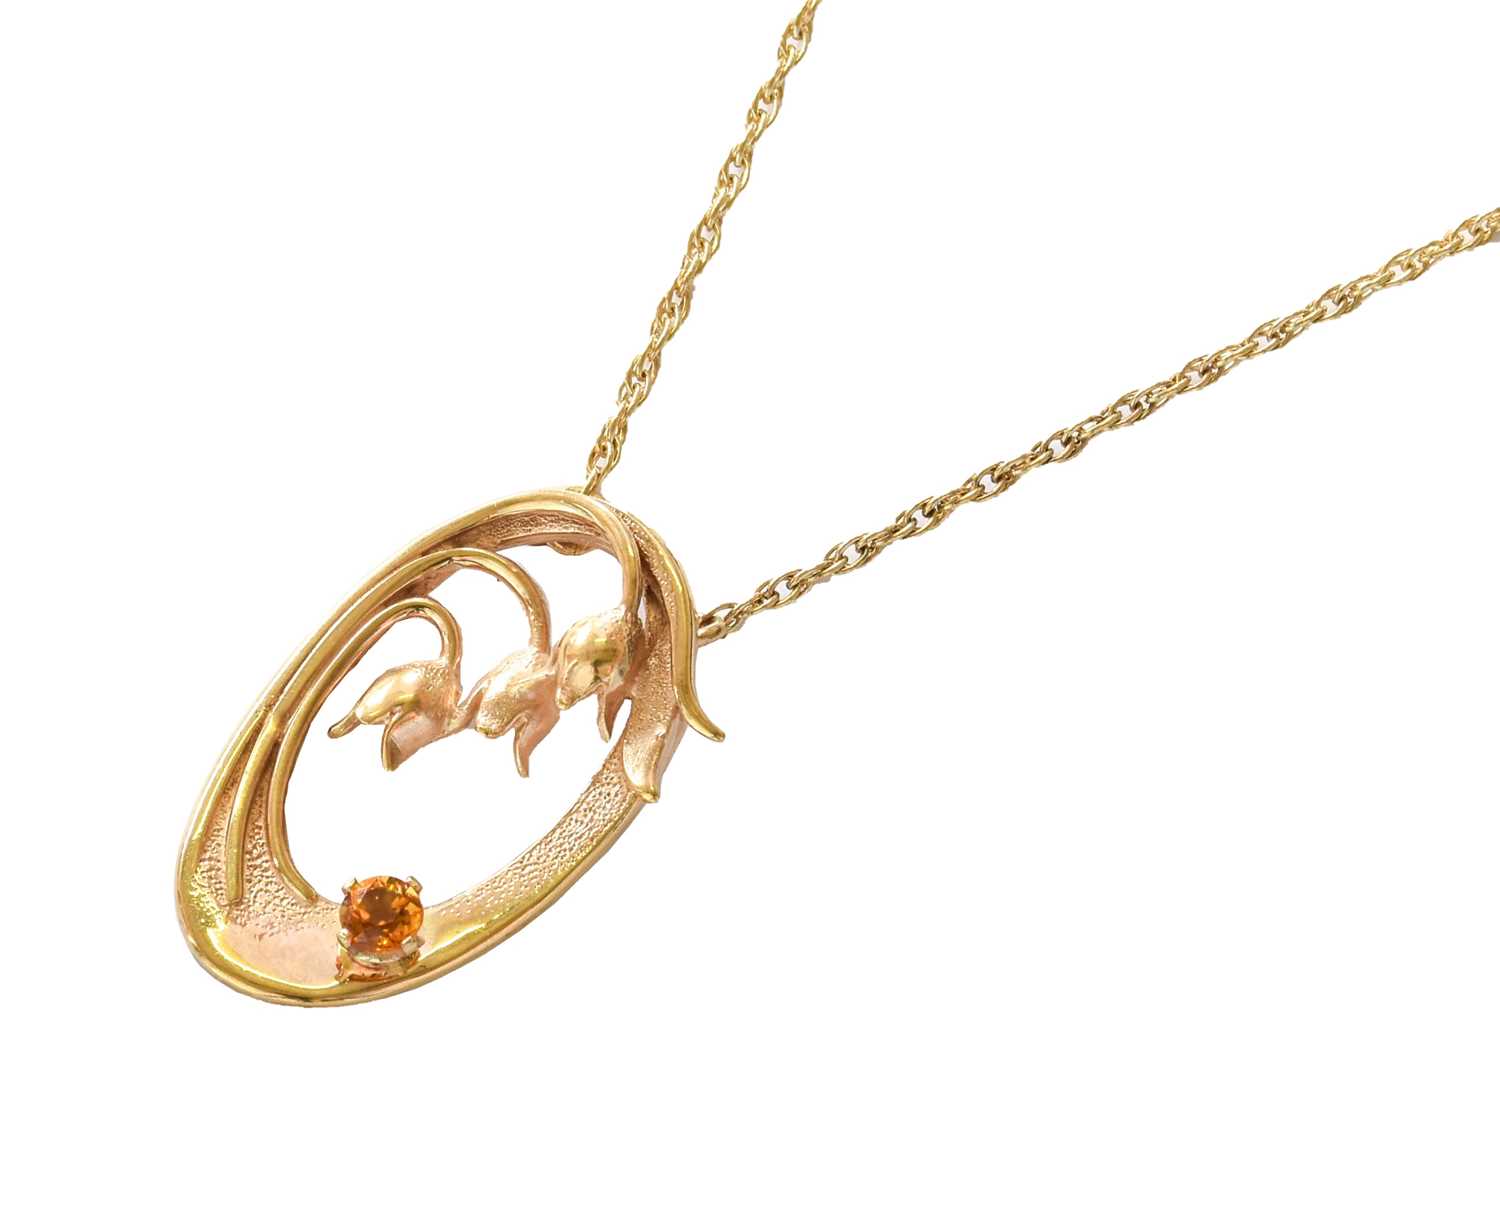 Lot 11 - A 9 Carat Gold Lily of the Valley Pendant on